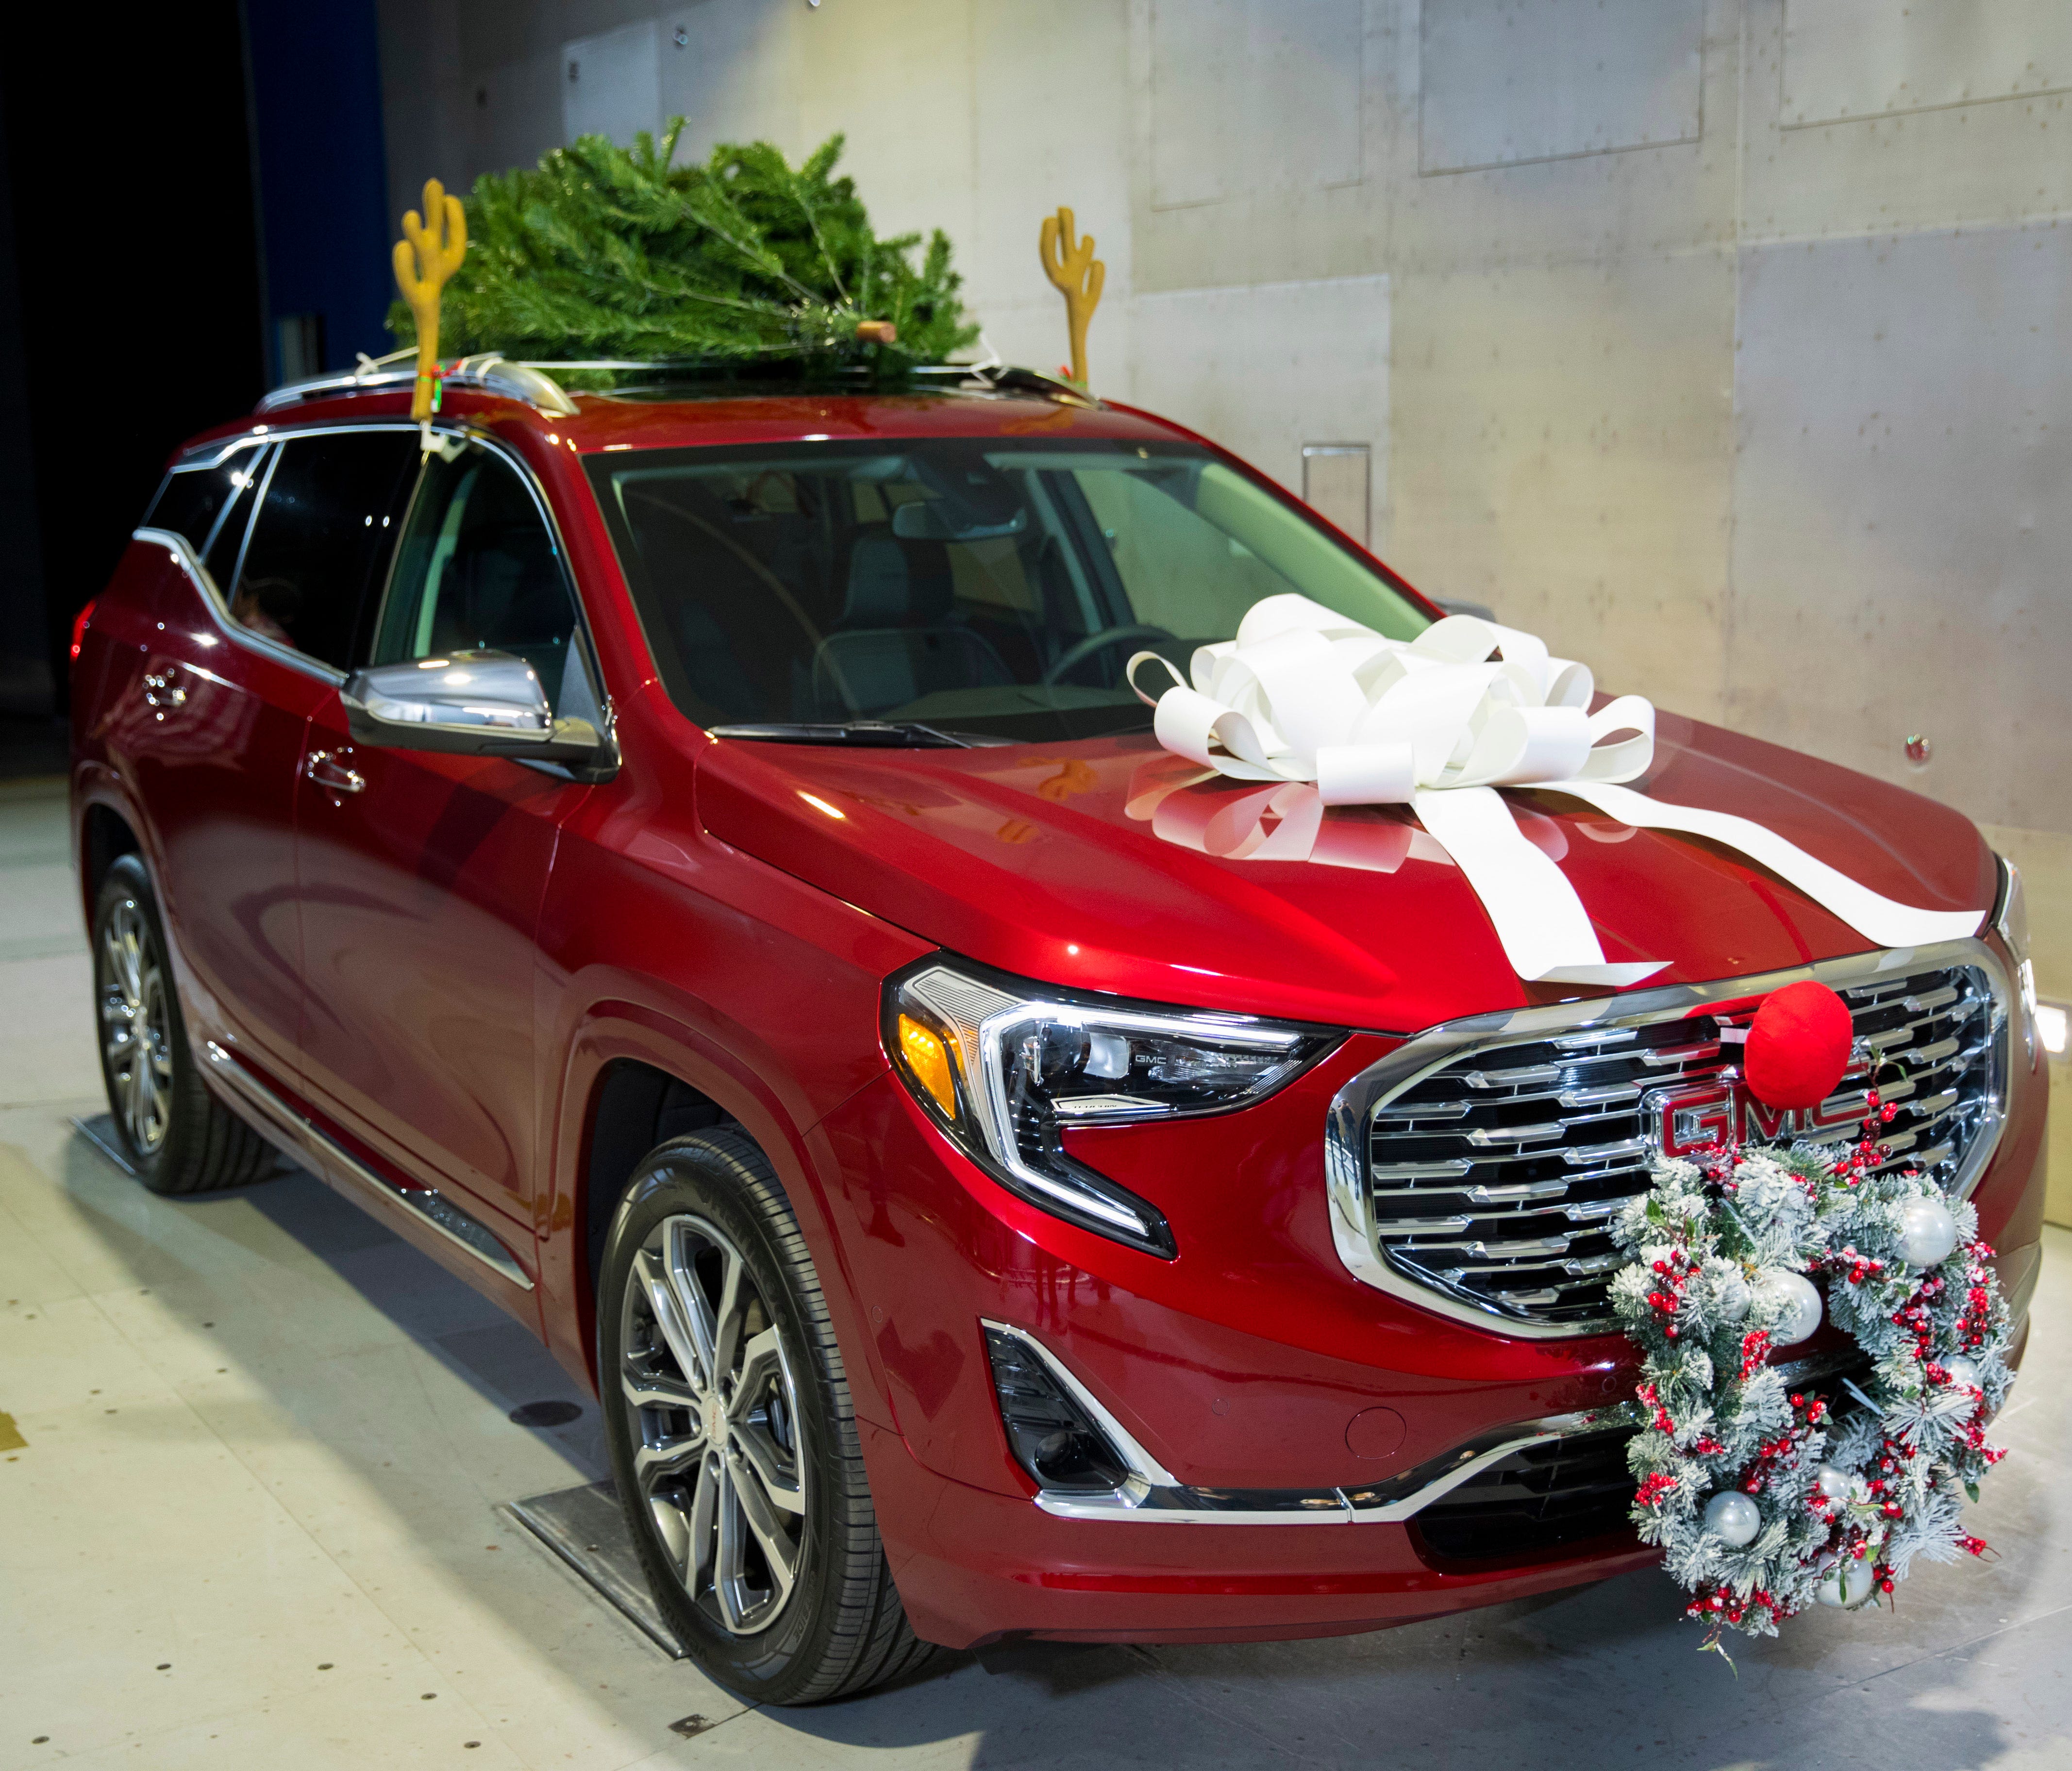 Thsi 2018 GMC Terrain Denali was outfitted with Christmas regalia for fuel-efficiency testing.